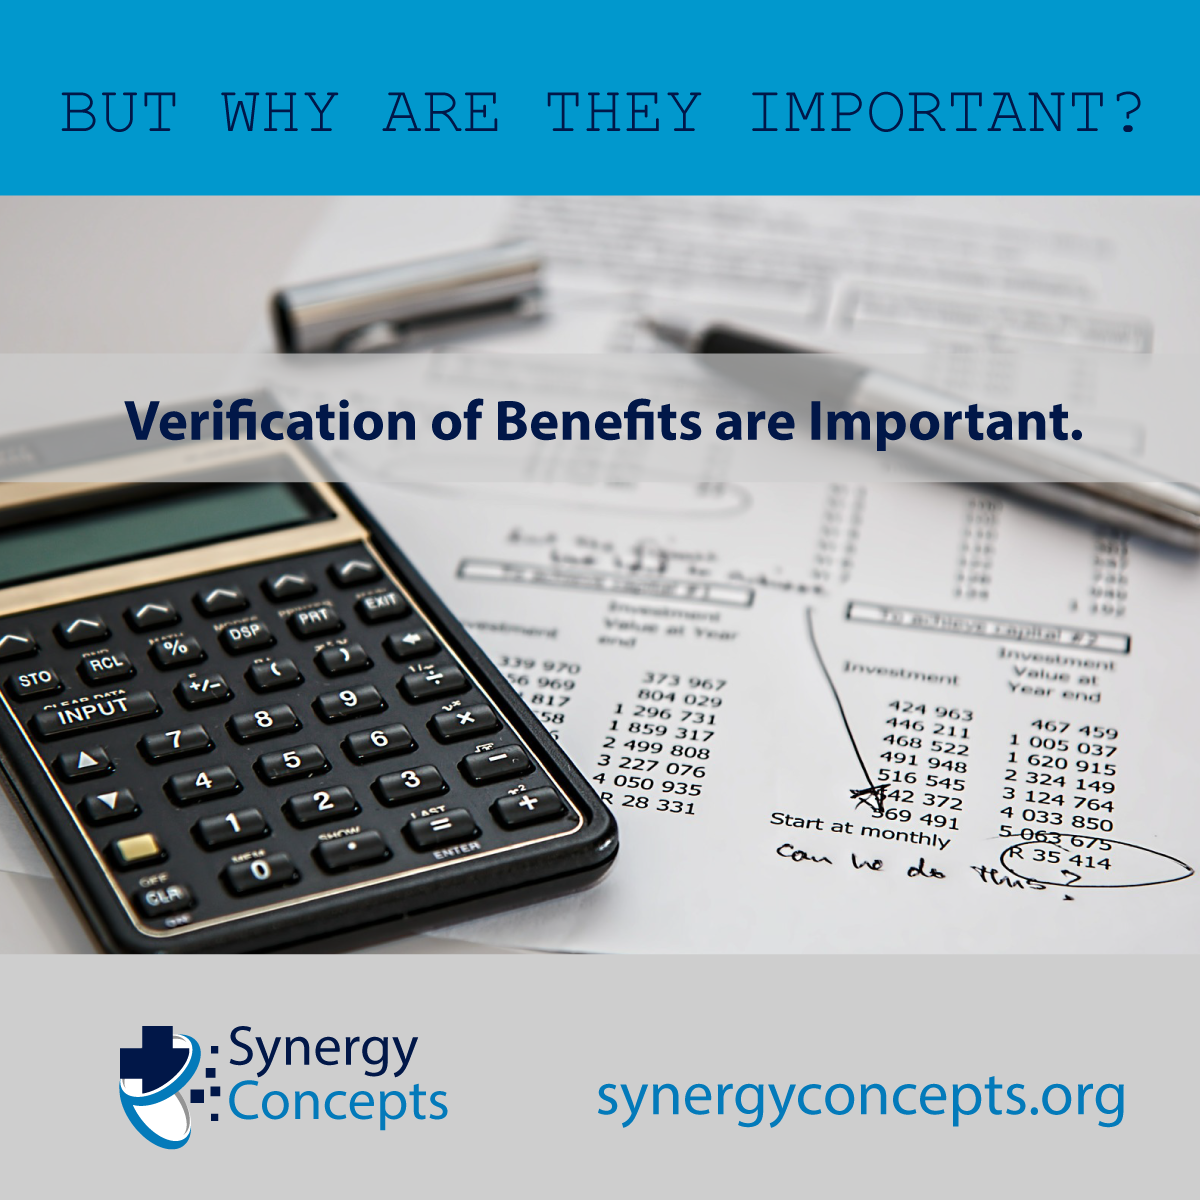 Verification of Benefits: Why Are They Important? - Synergy Concepts behavioral health medical billing and coding